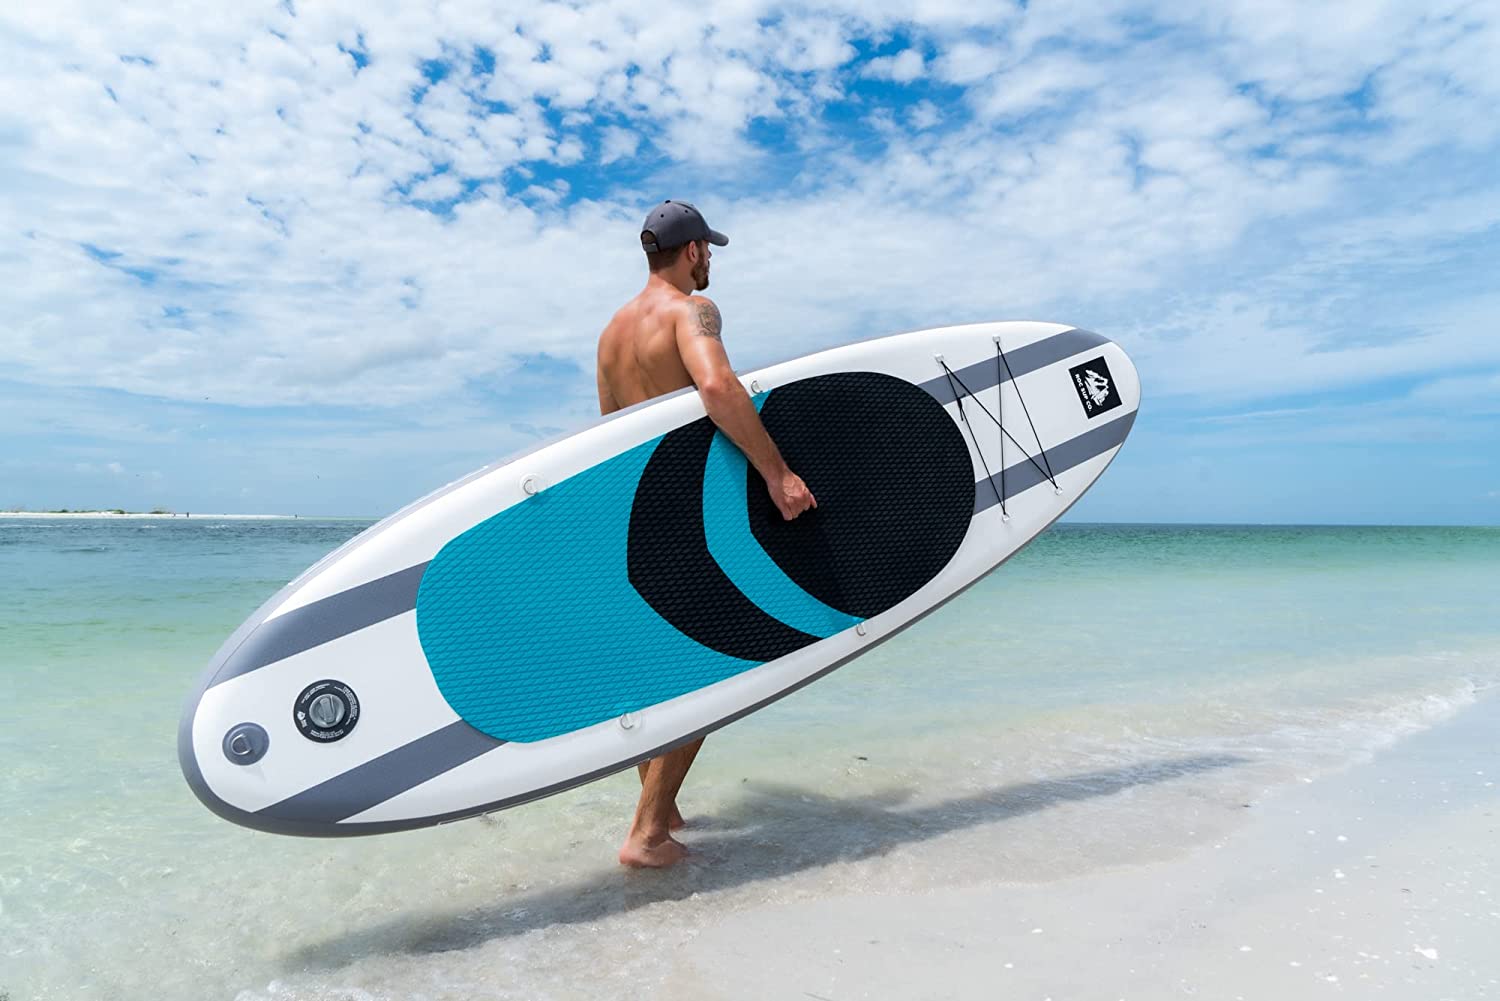 Roc Inflatable Stand Up Paddle Board with Premium Sup Accessories & Backpack, Non-Slip Deck, Waterproof Bag, Leash, Paddle and Hand Pump